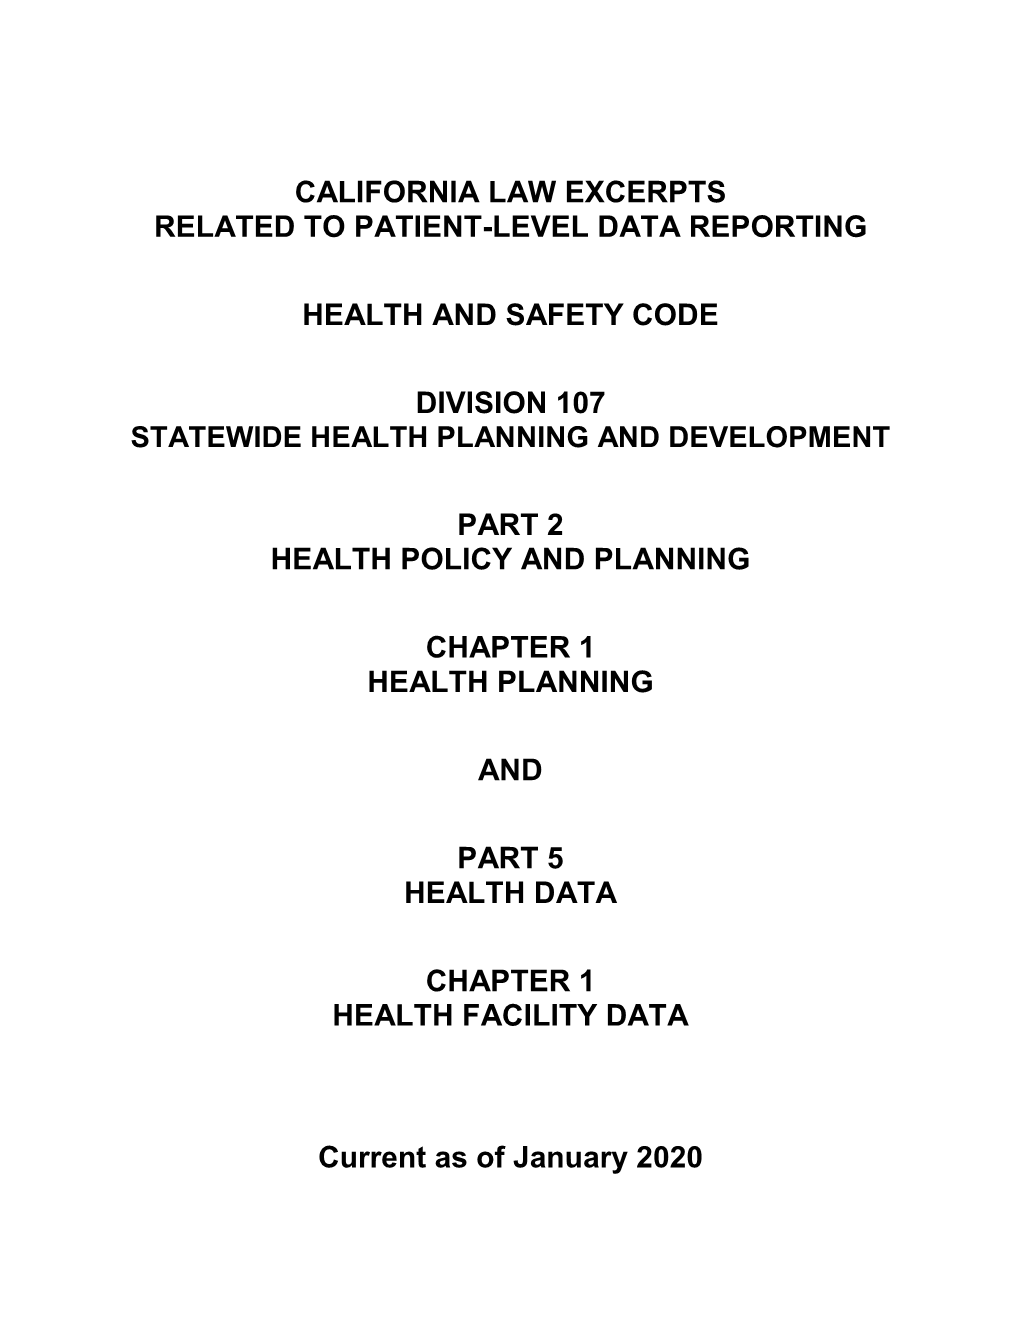 Health and Safety Code Division 107 Health Care Data Reporting Excerpts